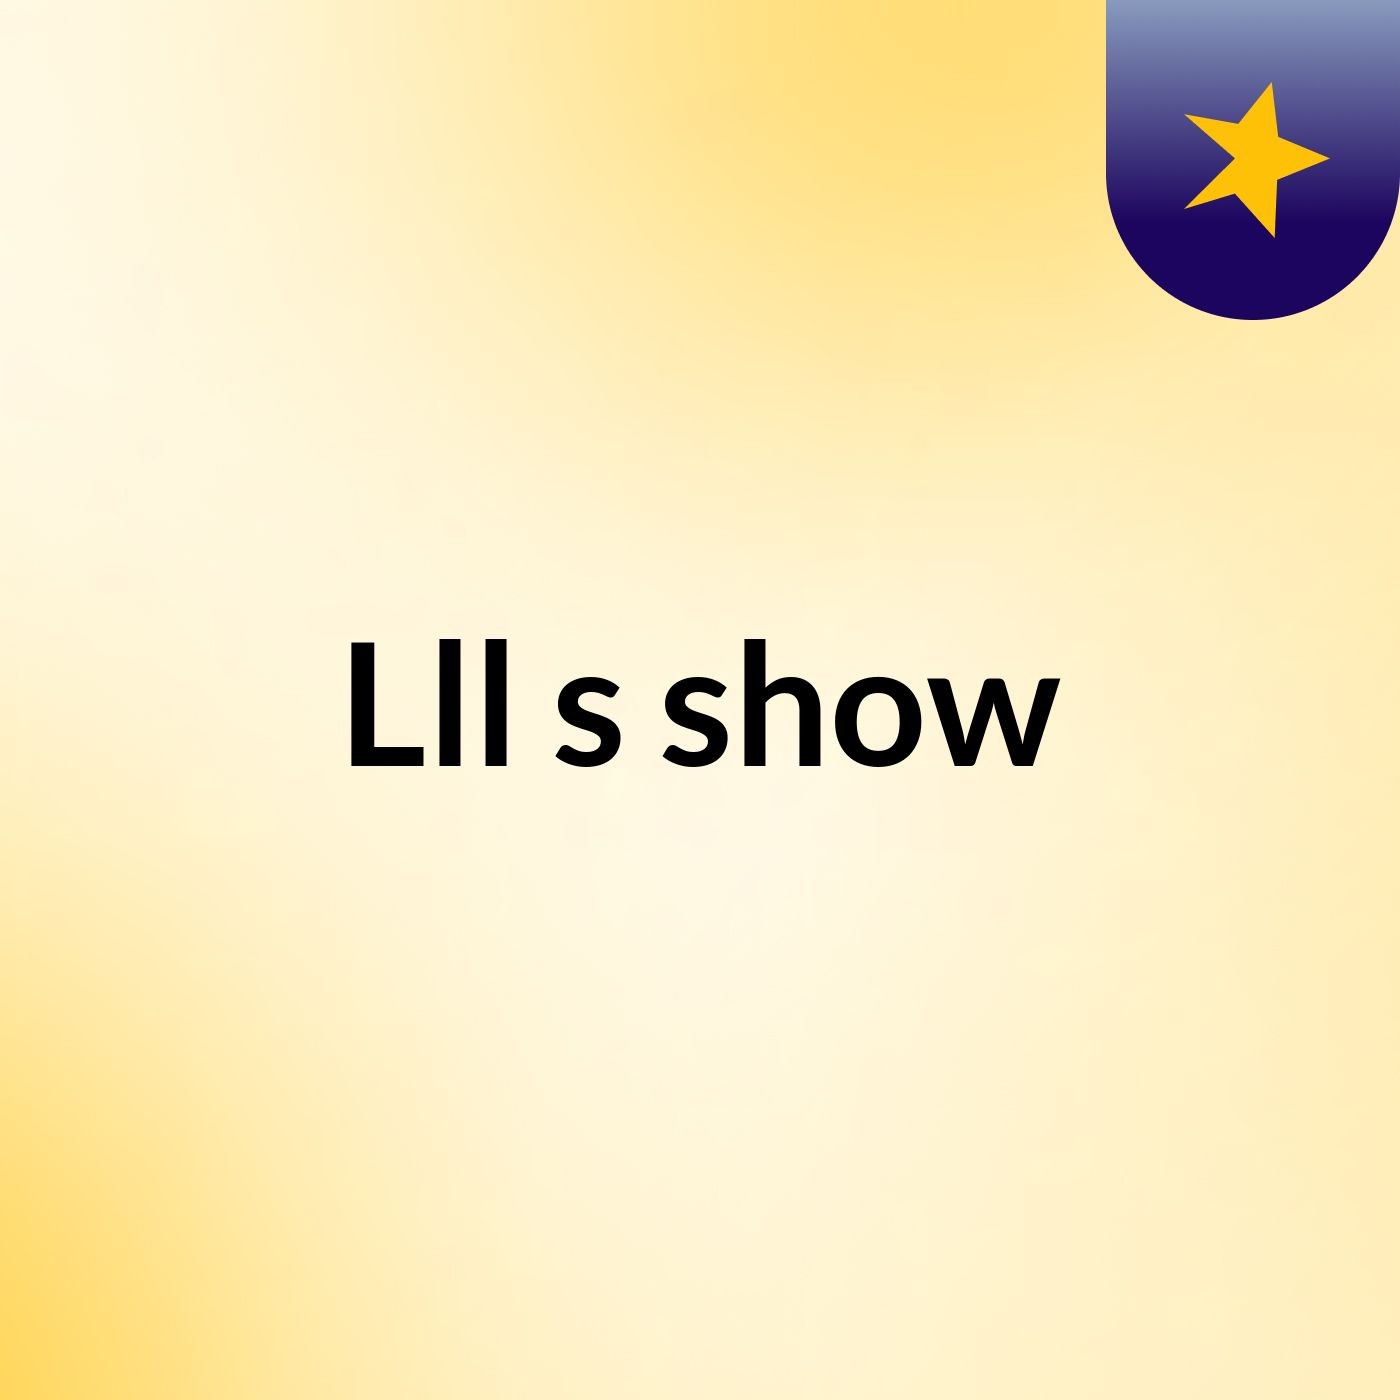 Lll's show